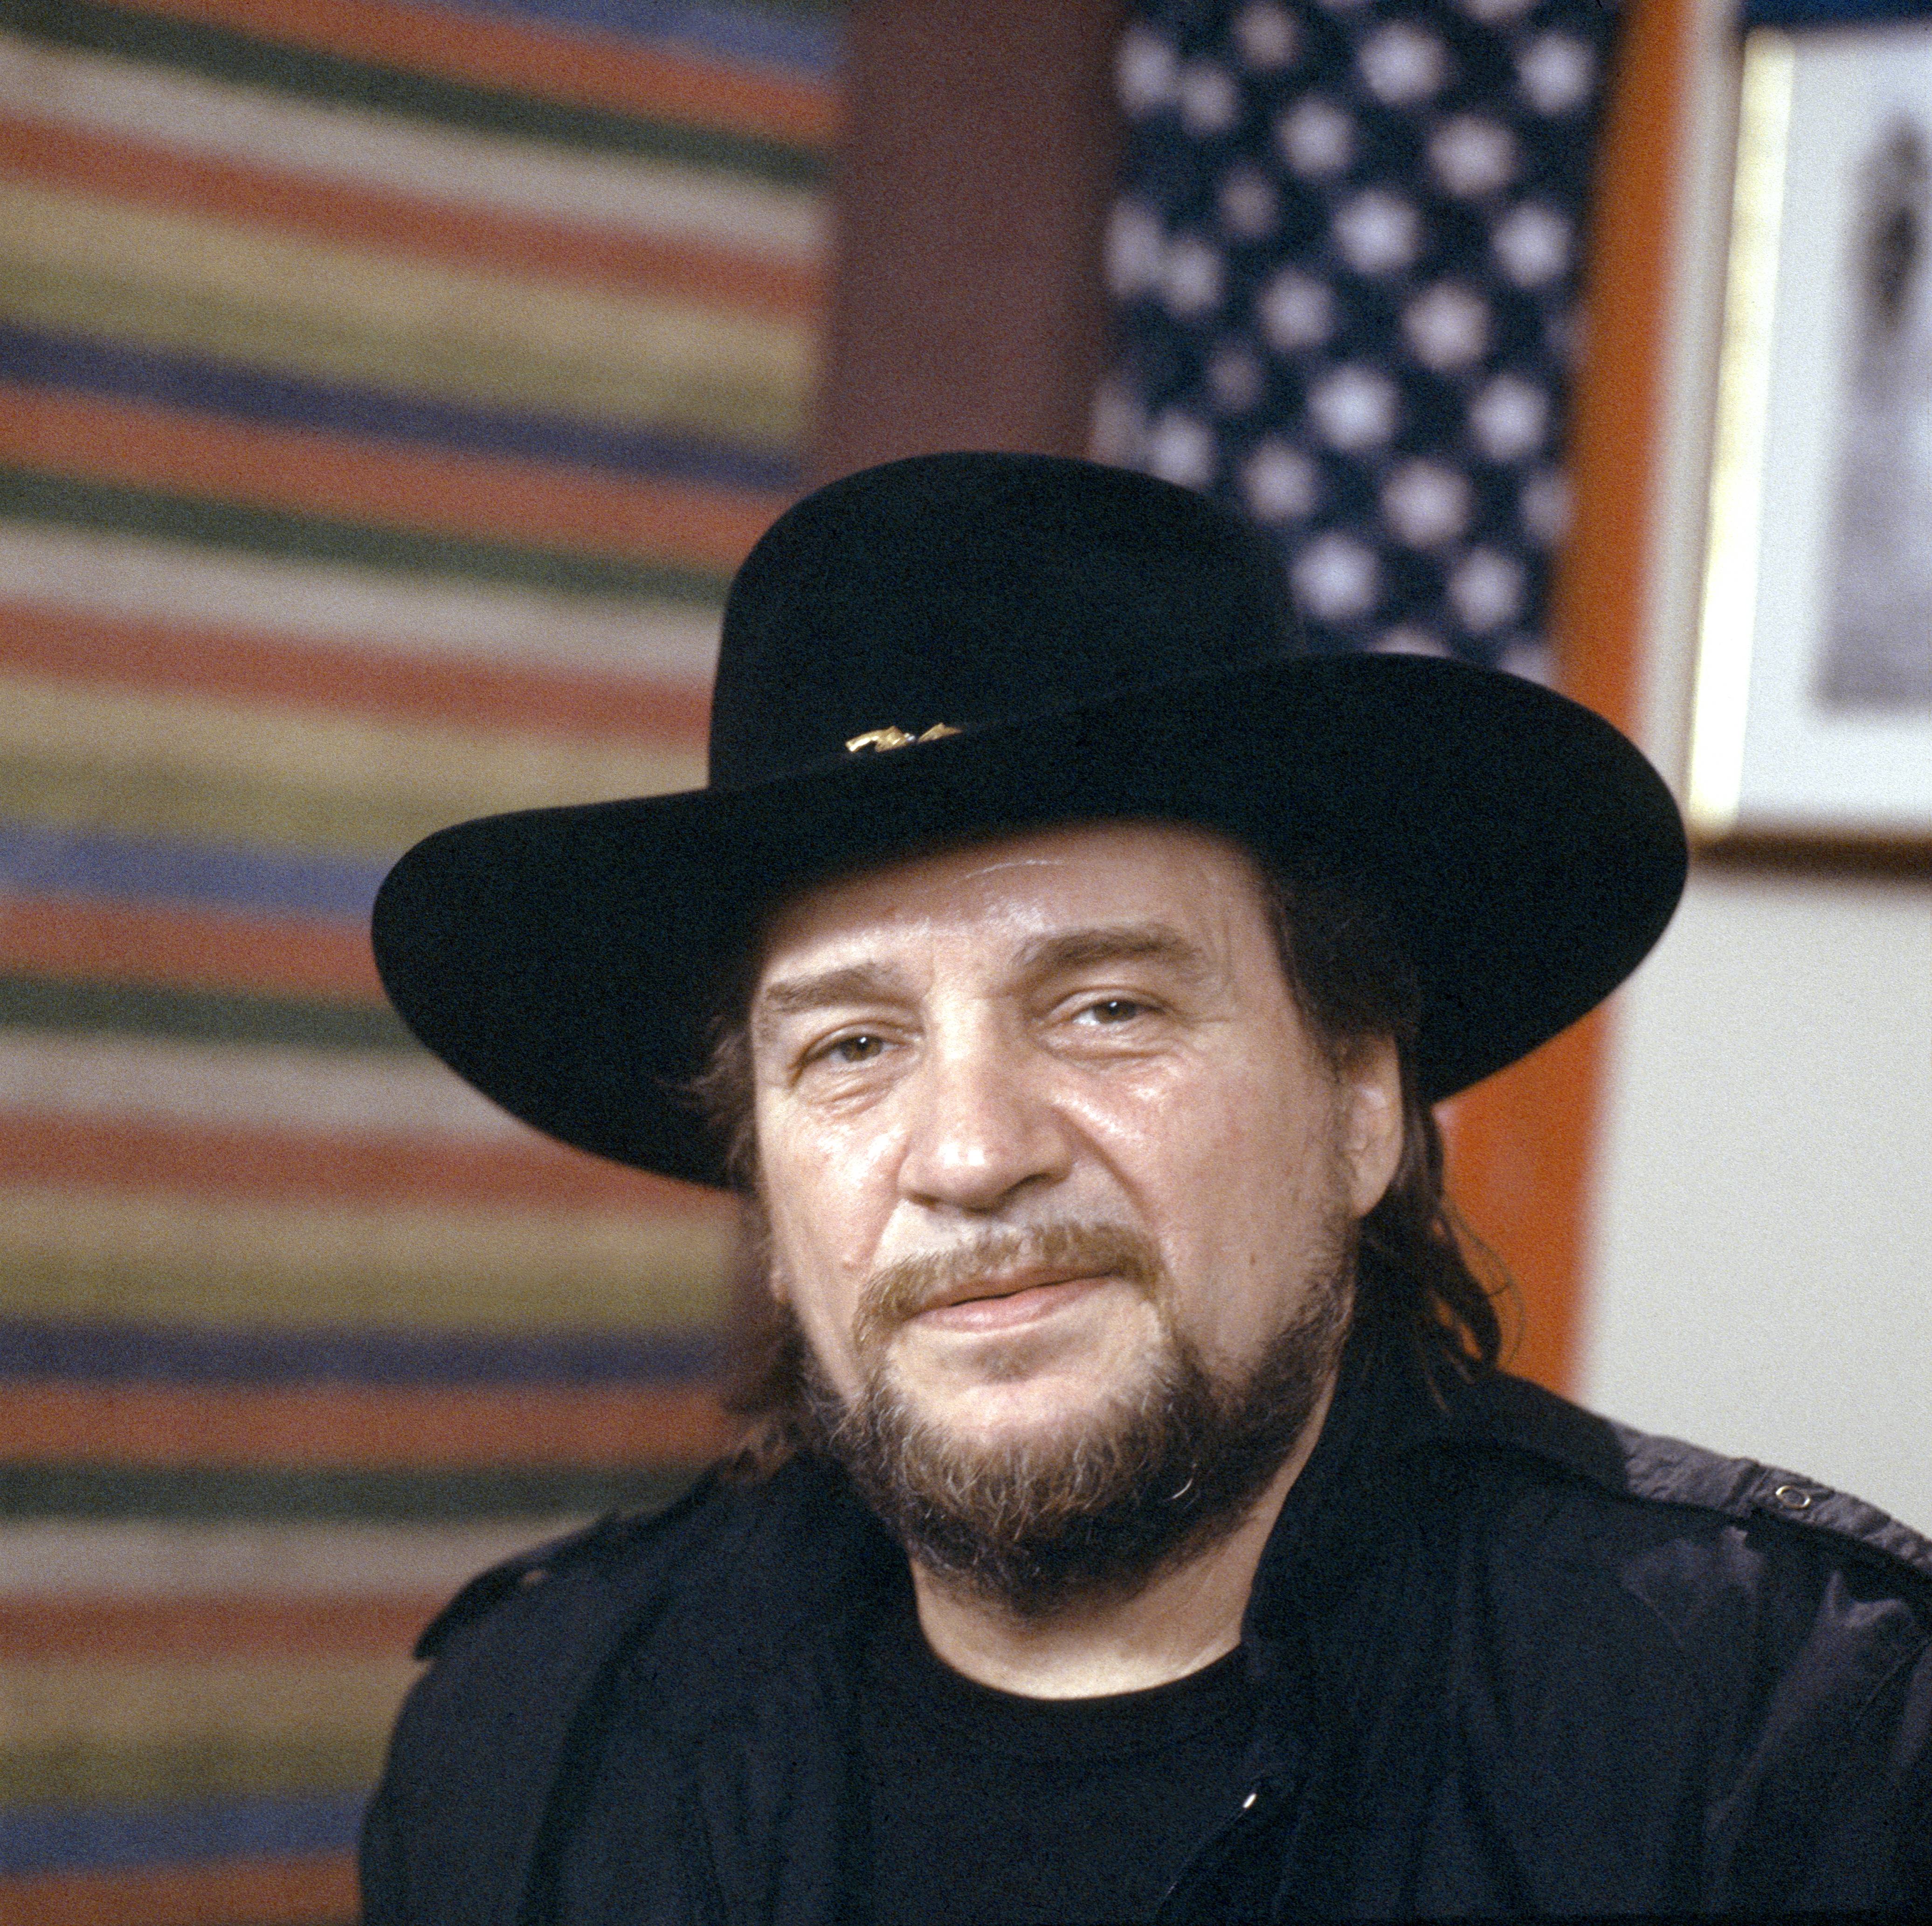 Waylon Jennings on January 1 1980 in the United Kingdom | Source: Getty Images